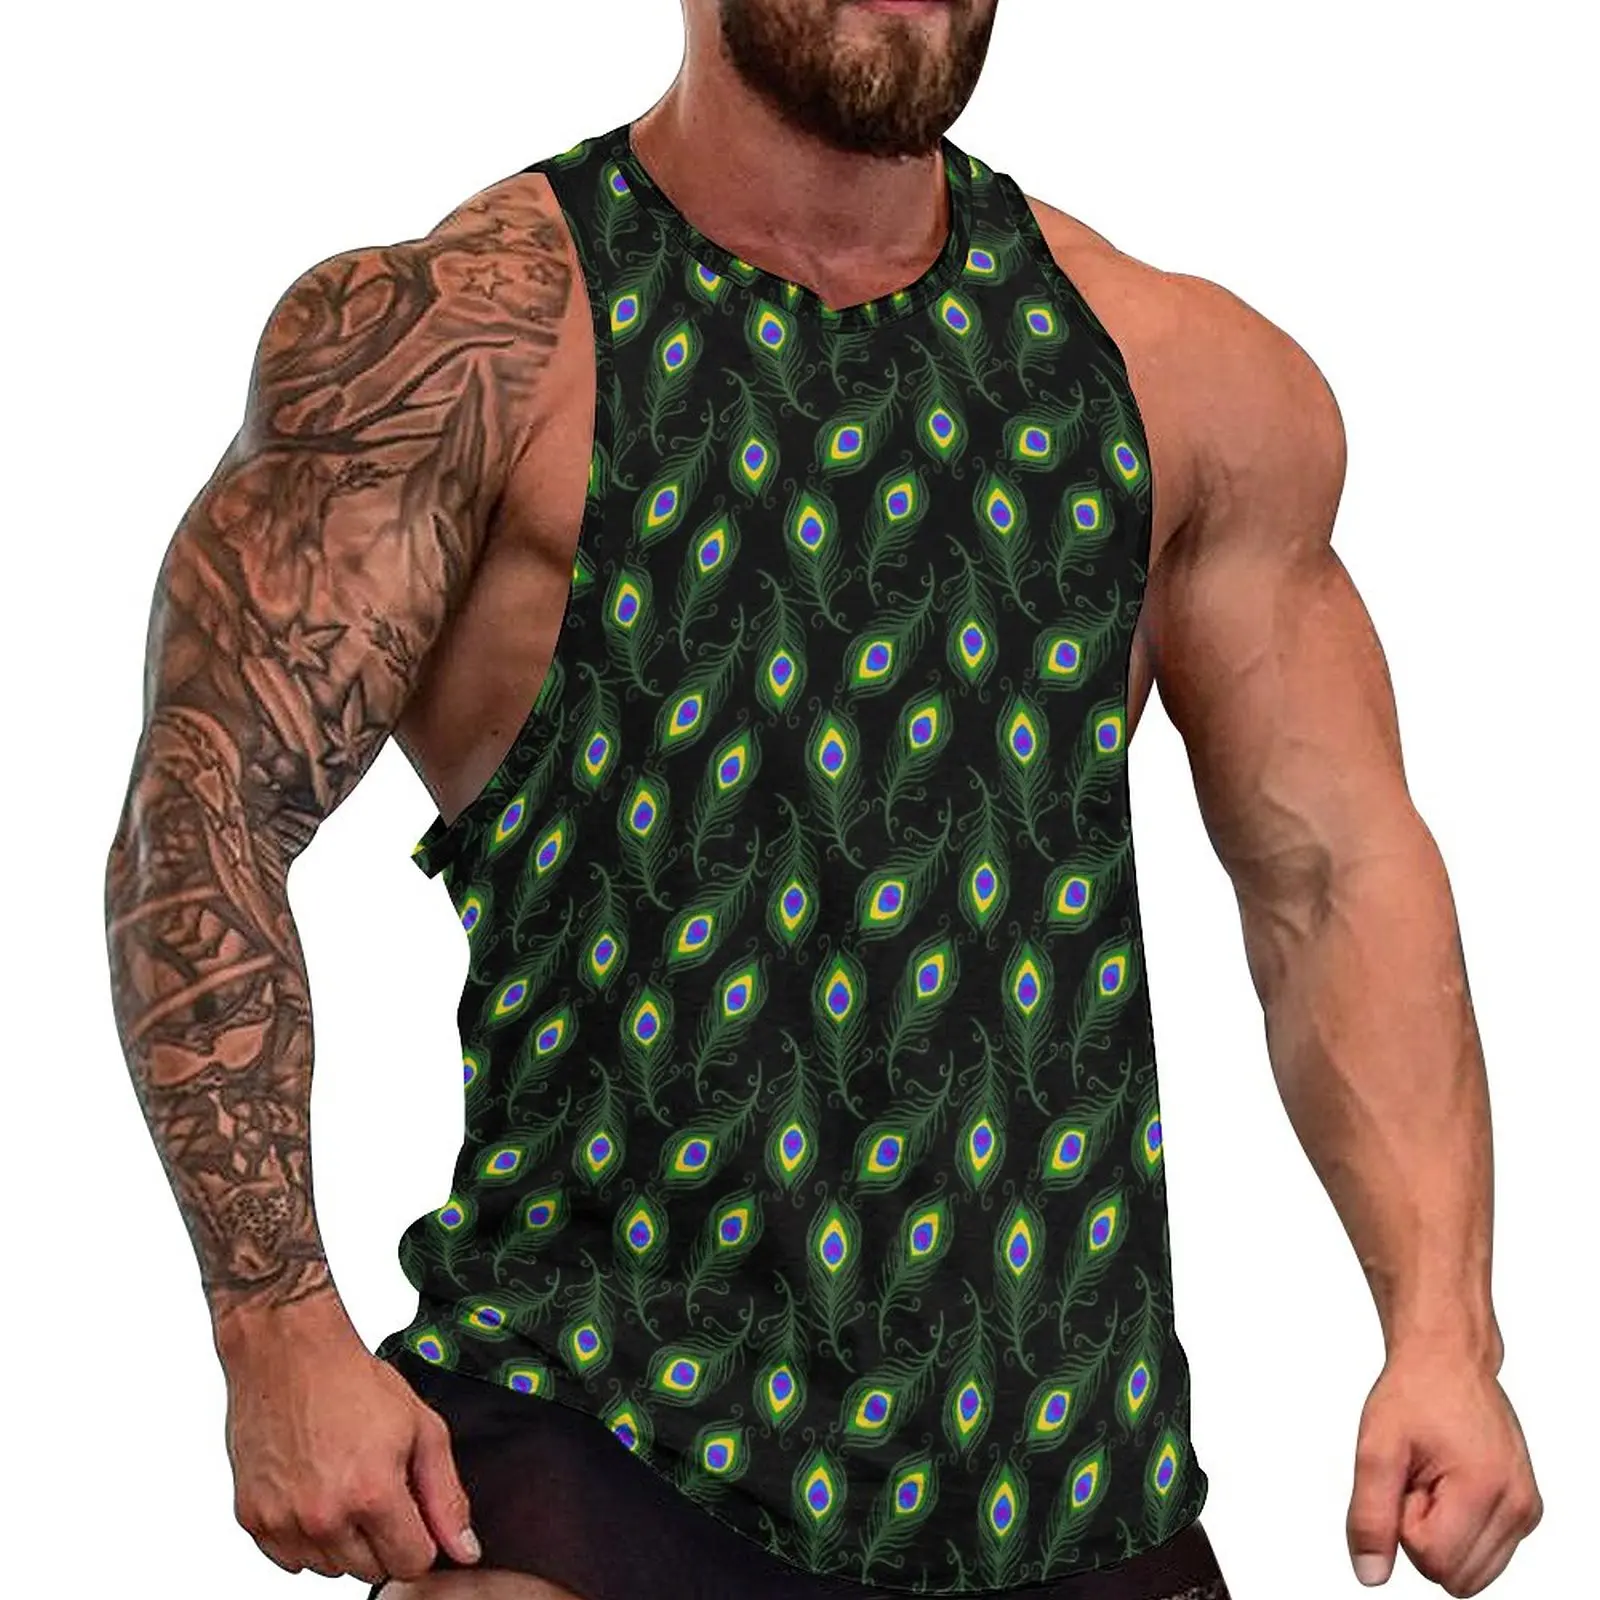 

Peacock Feathers Summer Tank Top Animal Print Bodybuilding Tops Man's Design Muscle Sleeveless Shirts Plus Size